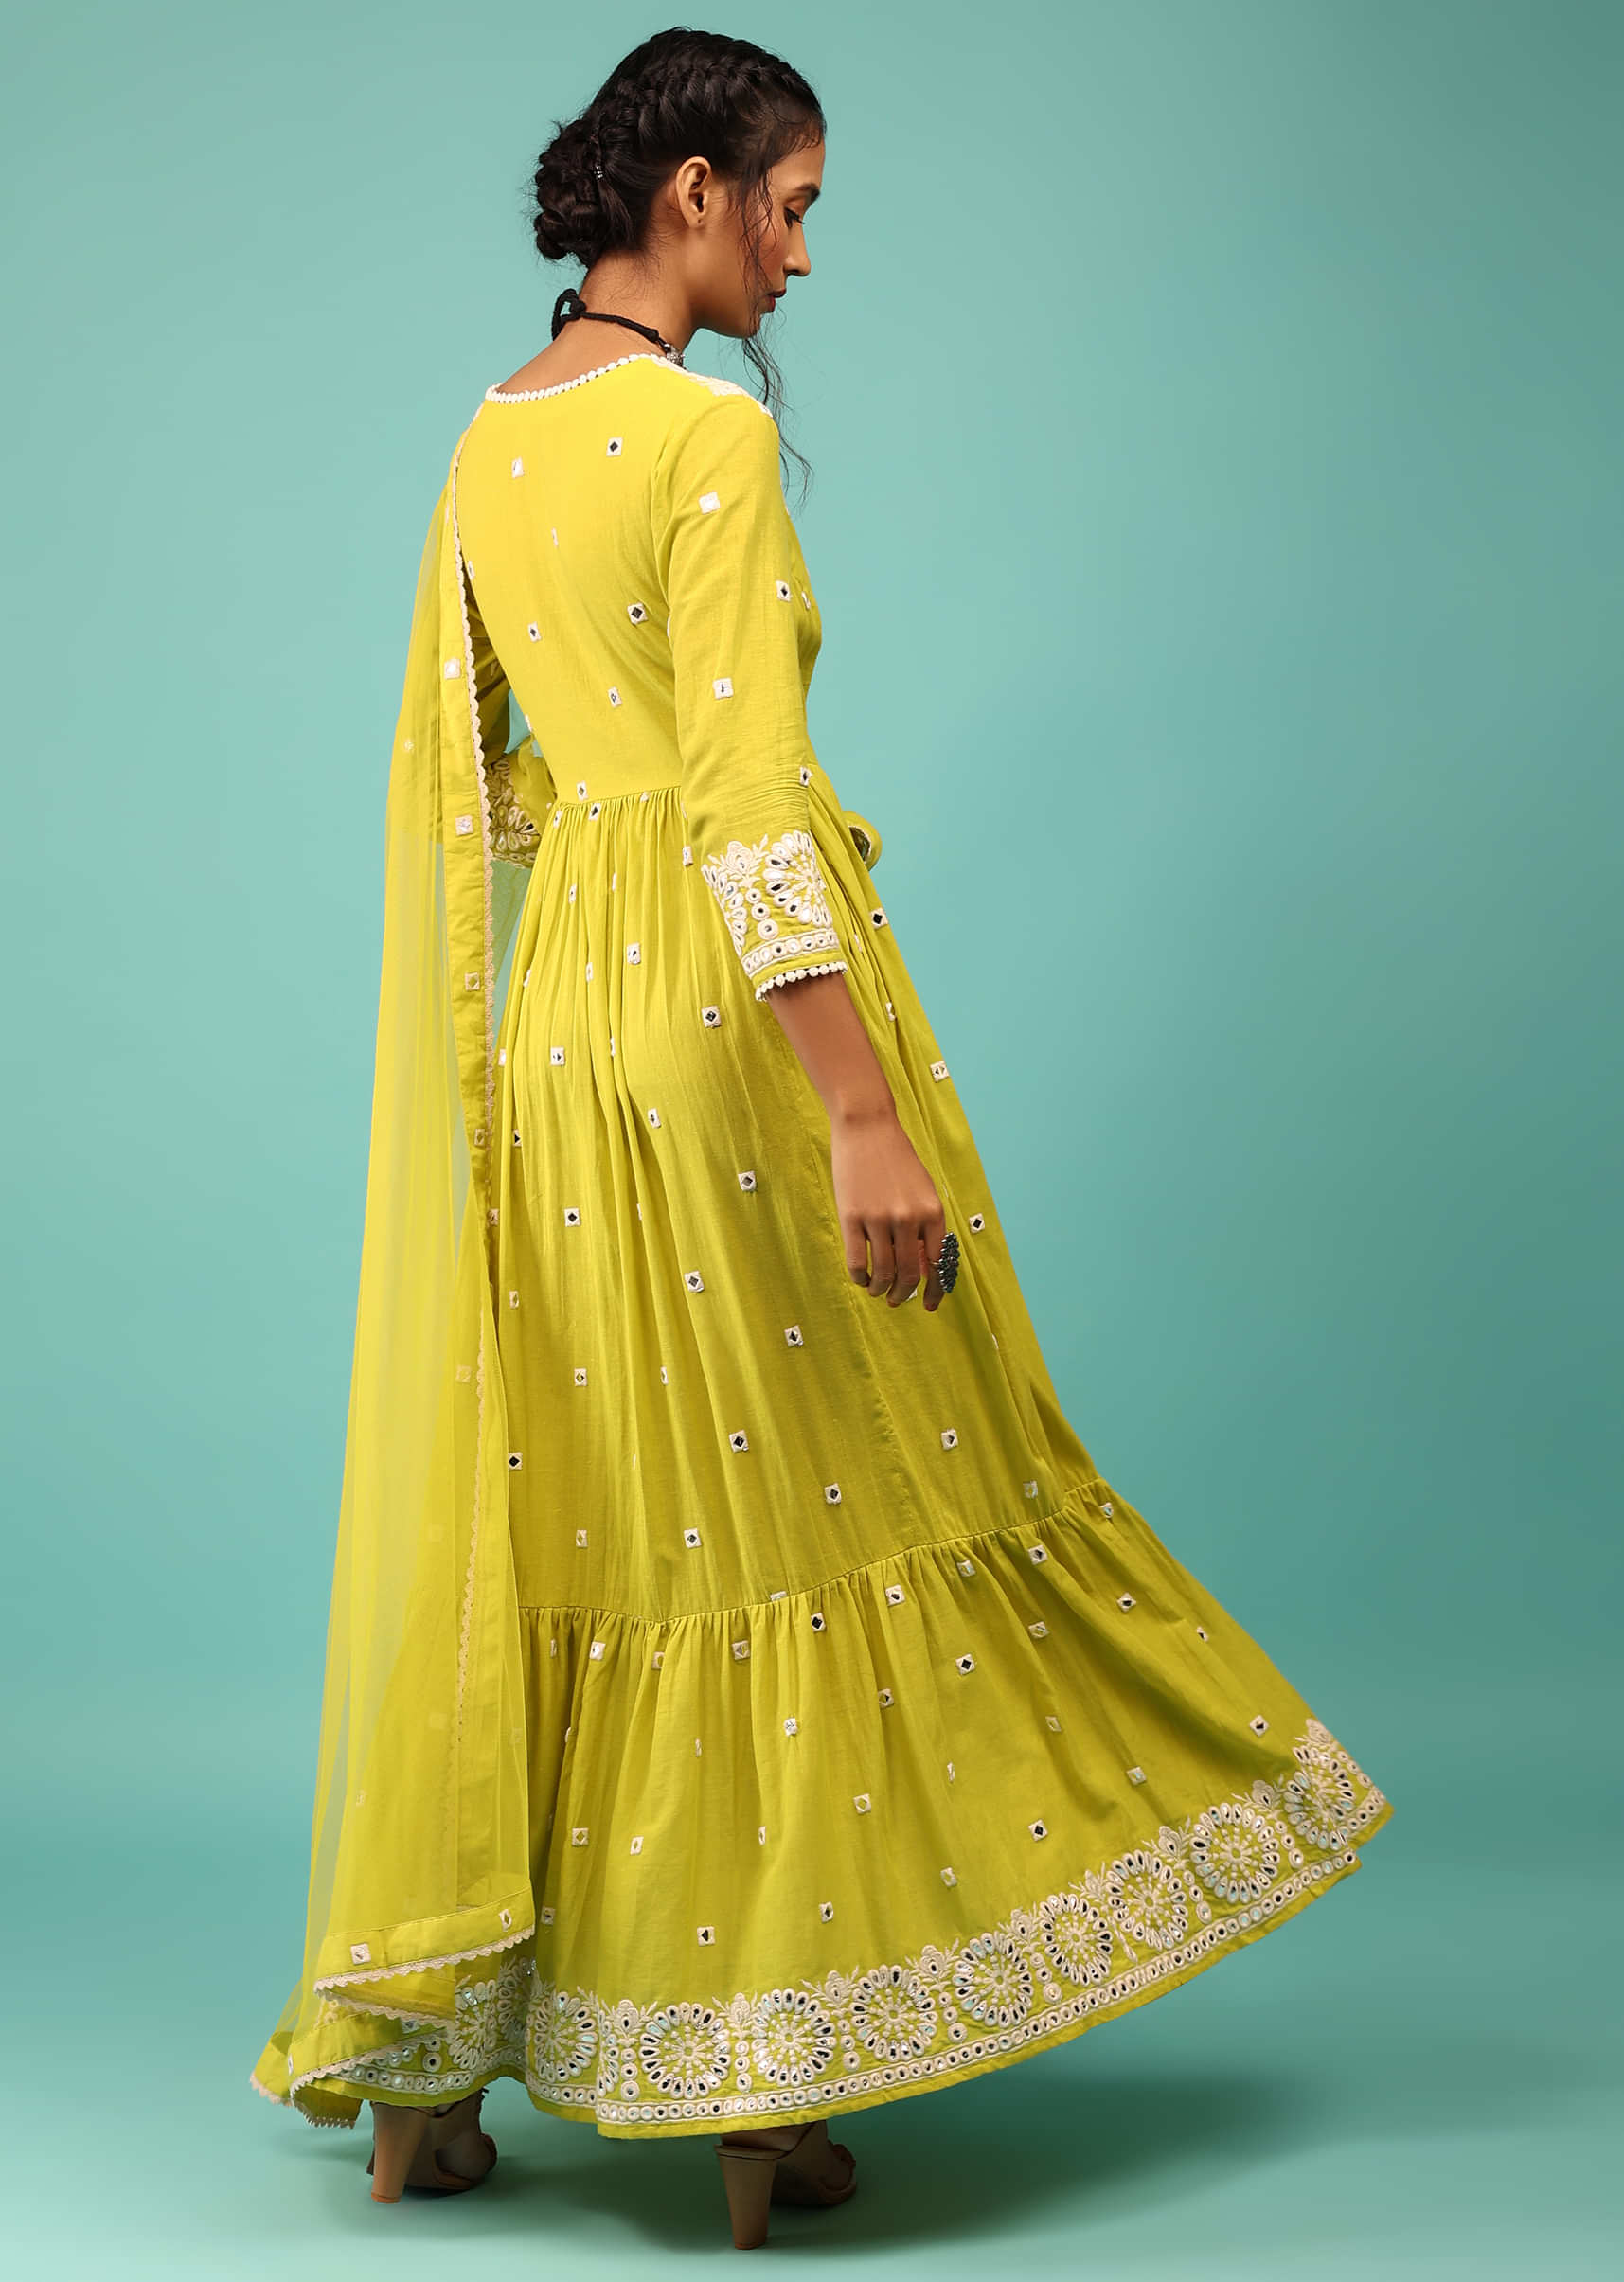 Lime Yellow Anarkali Kurta In Lucknowi Floral Embroidery With Angrakha Pattern & Surplice Neckline